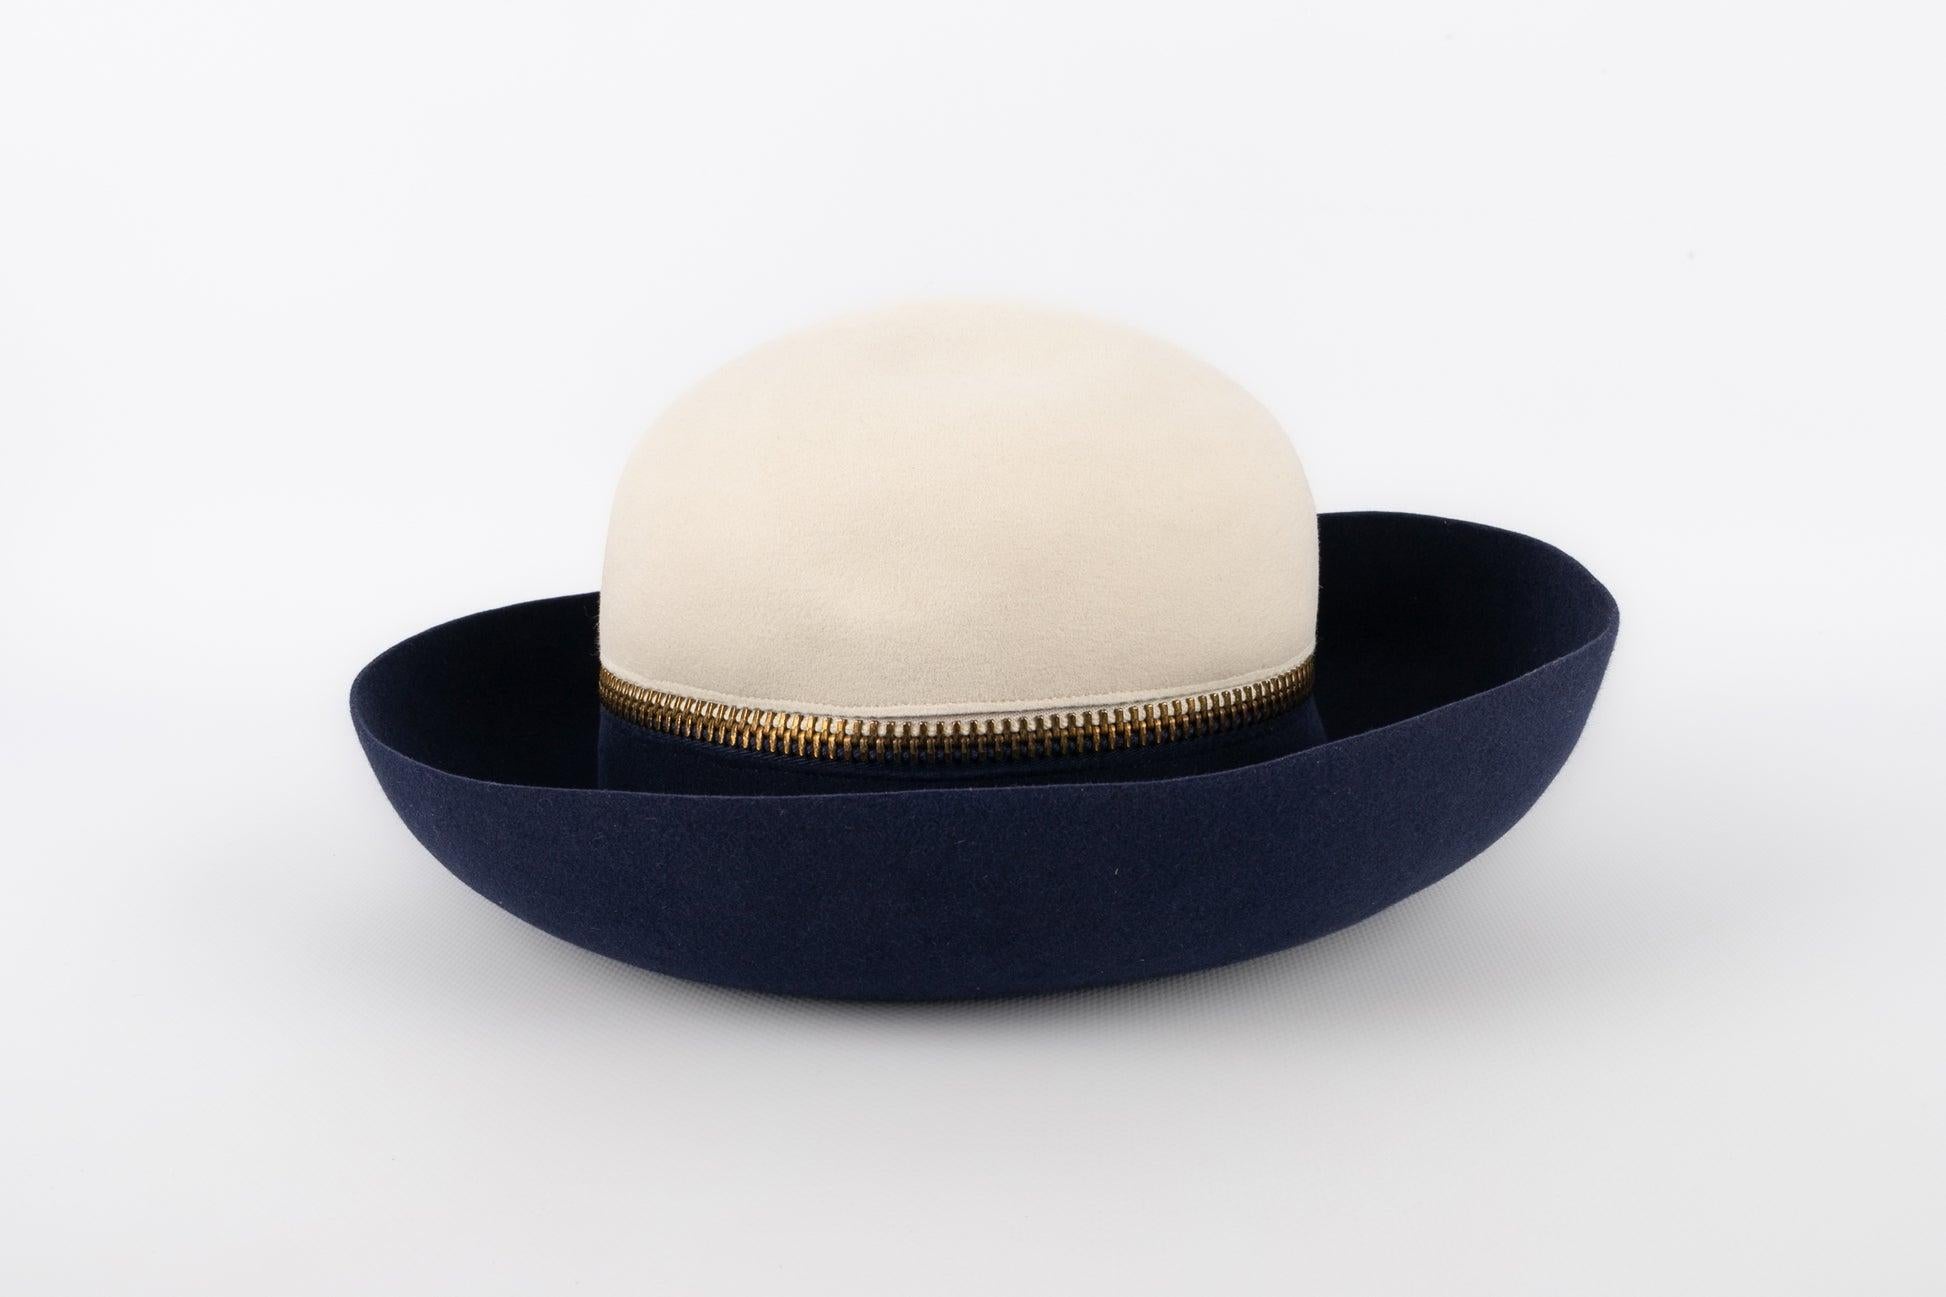 Lanvin - (Made in France) Blue and white felt hat ornamented with a golden metal zipper.

Additional information: 
Condition: Very good condition
Dimensions: Head circumference: 51 cm

Seller Reference: CHP30